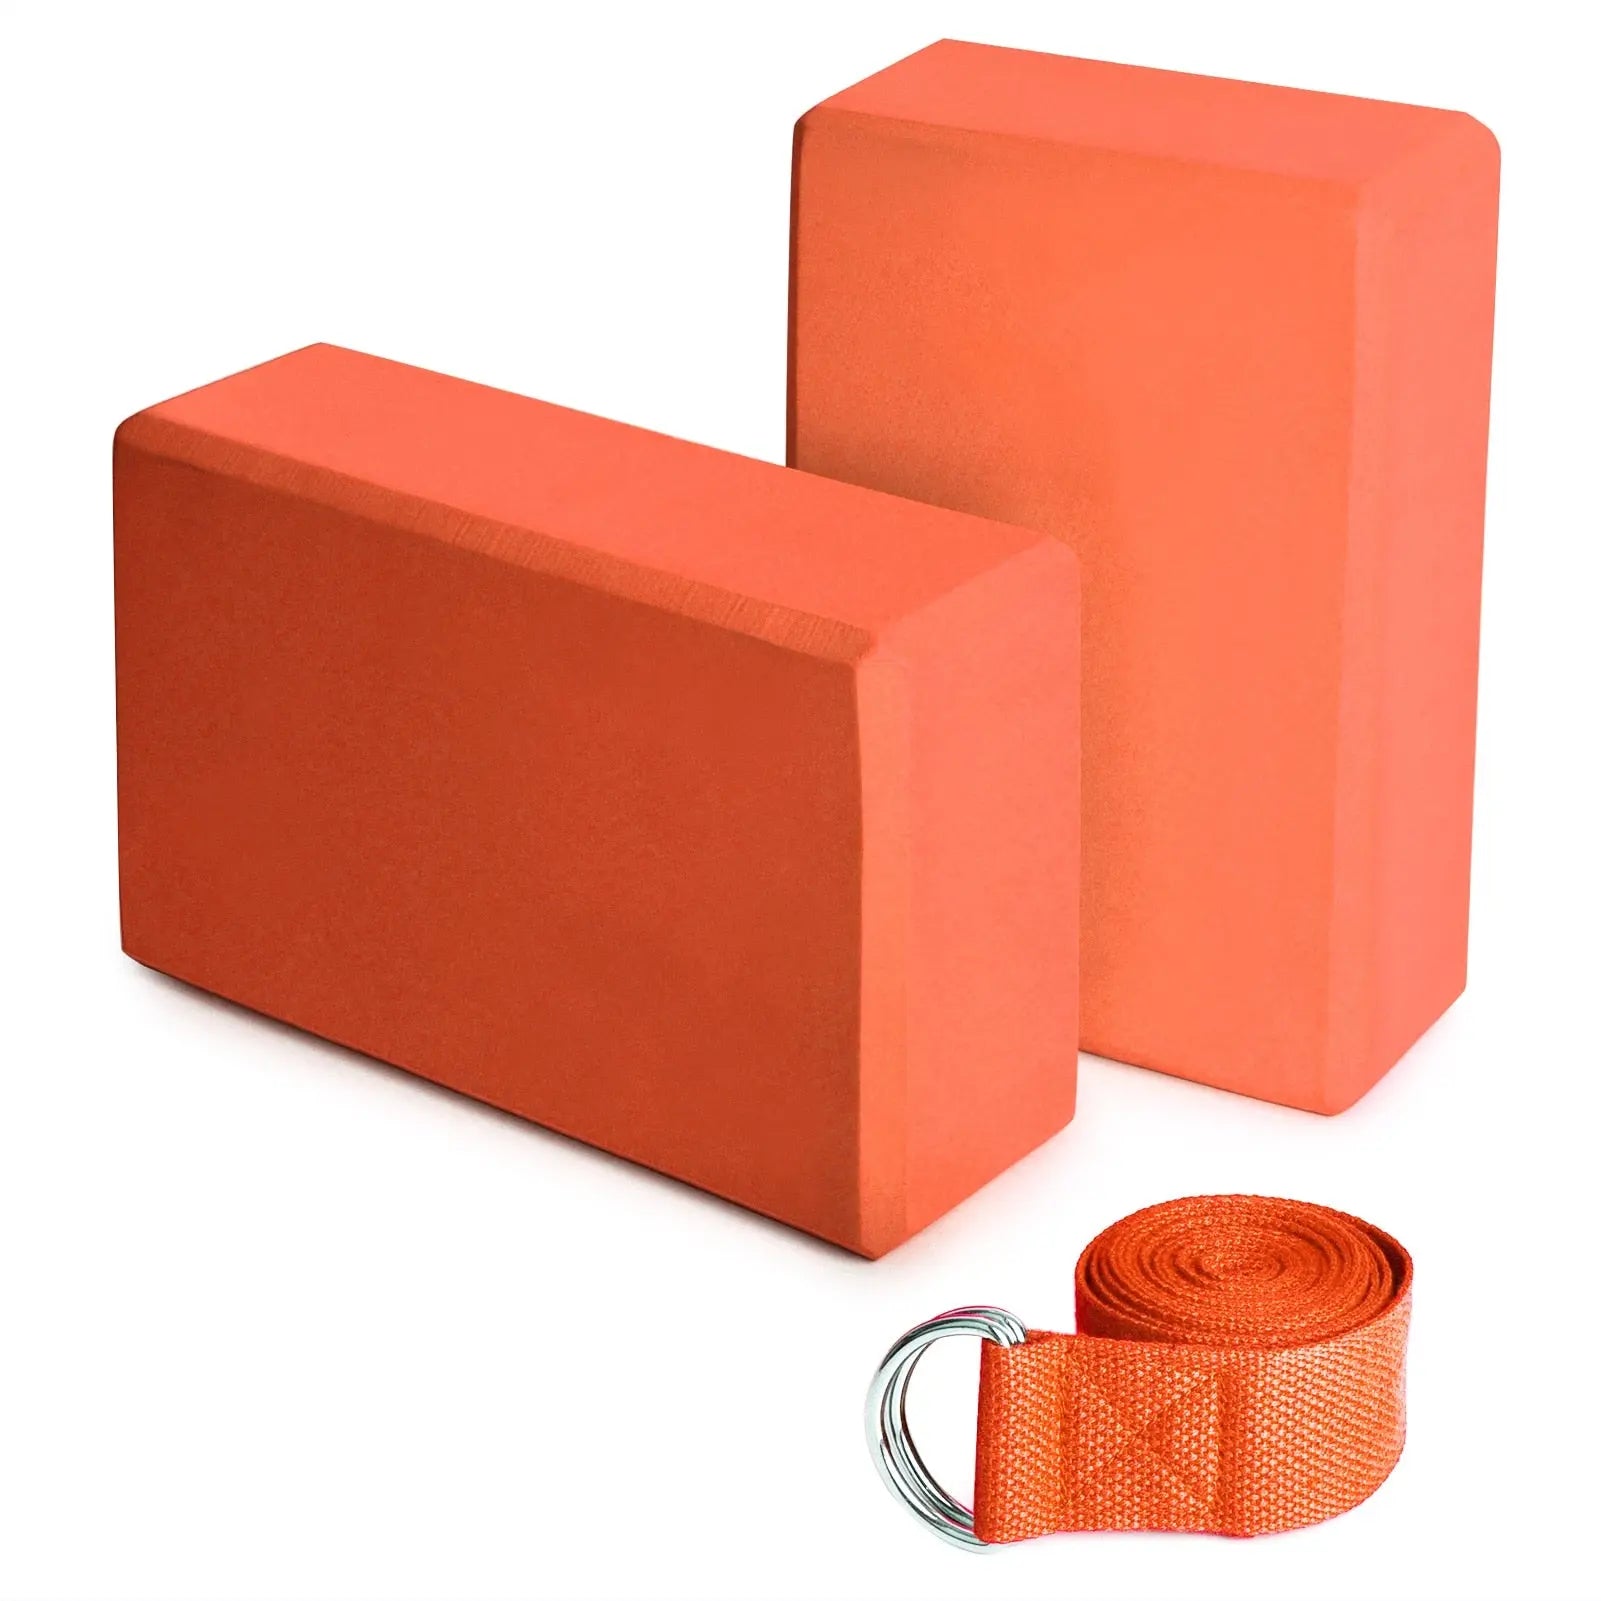 Yoga Block 2 Pack with Yoga Strap